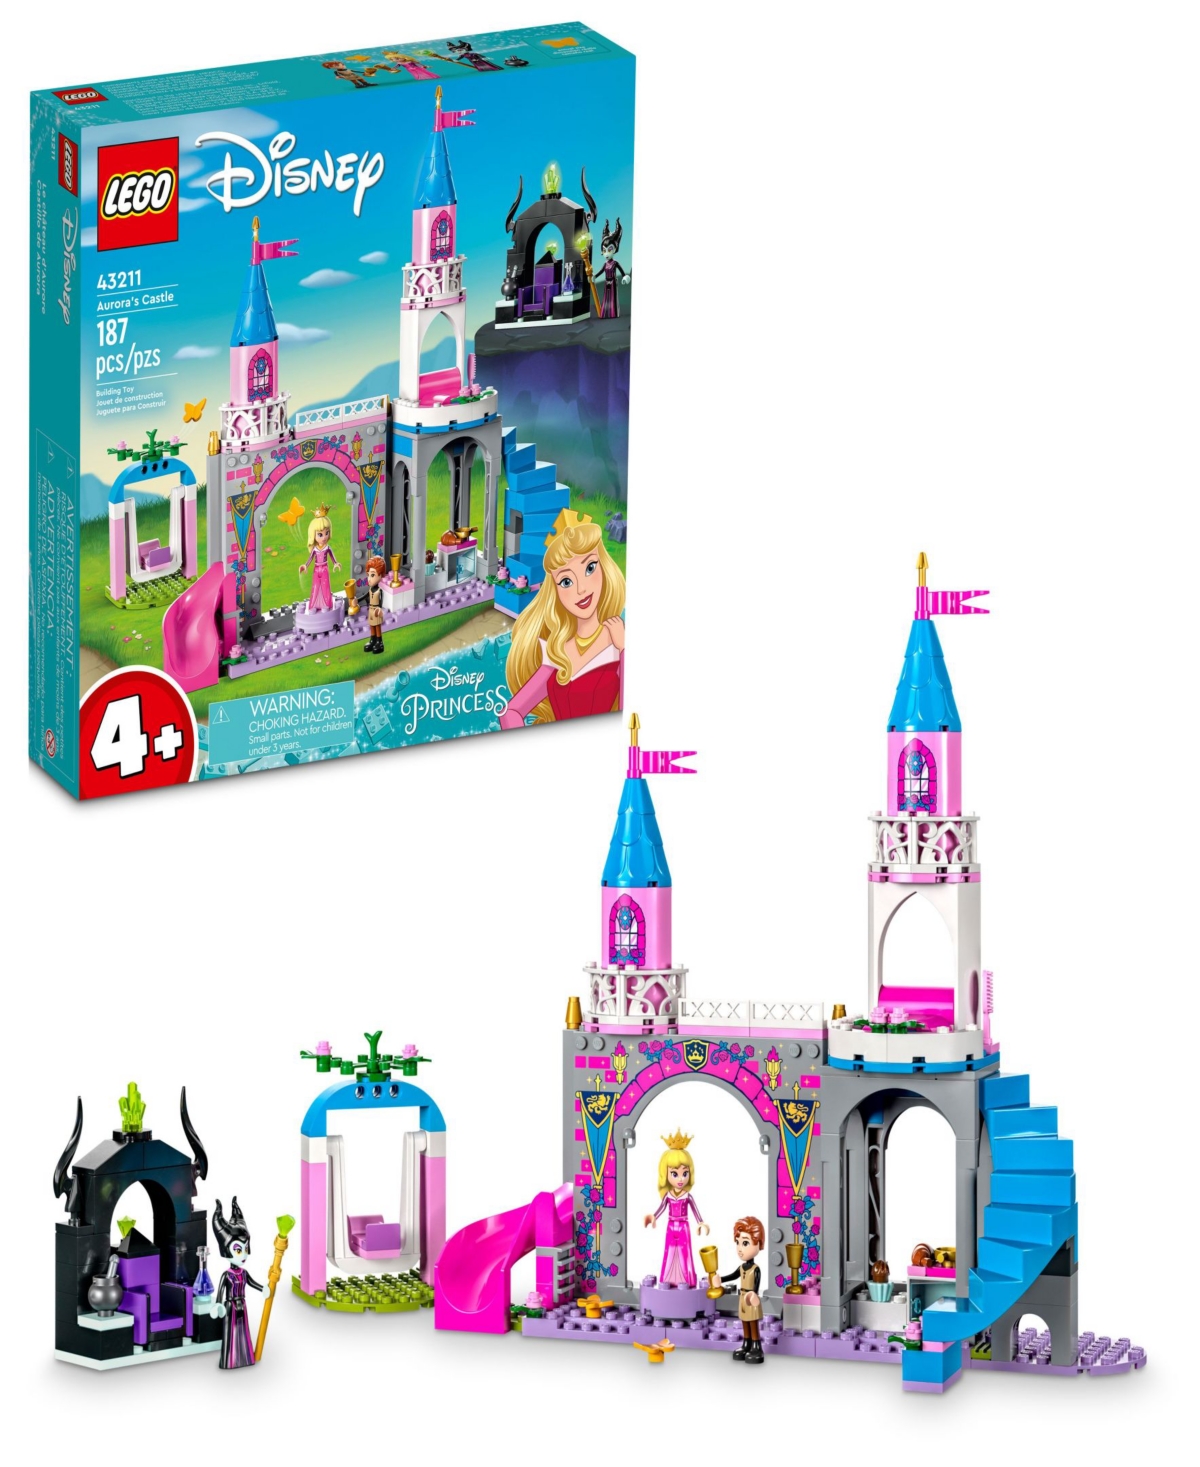 Lego Disney Princess Aurora's Castle 43211 Toy Building Set With Aurora, Prince Philip And Maleficent Min In Multicolor